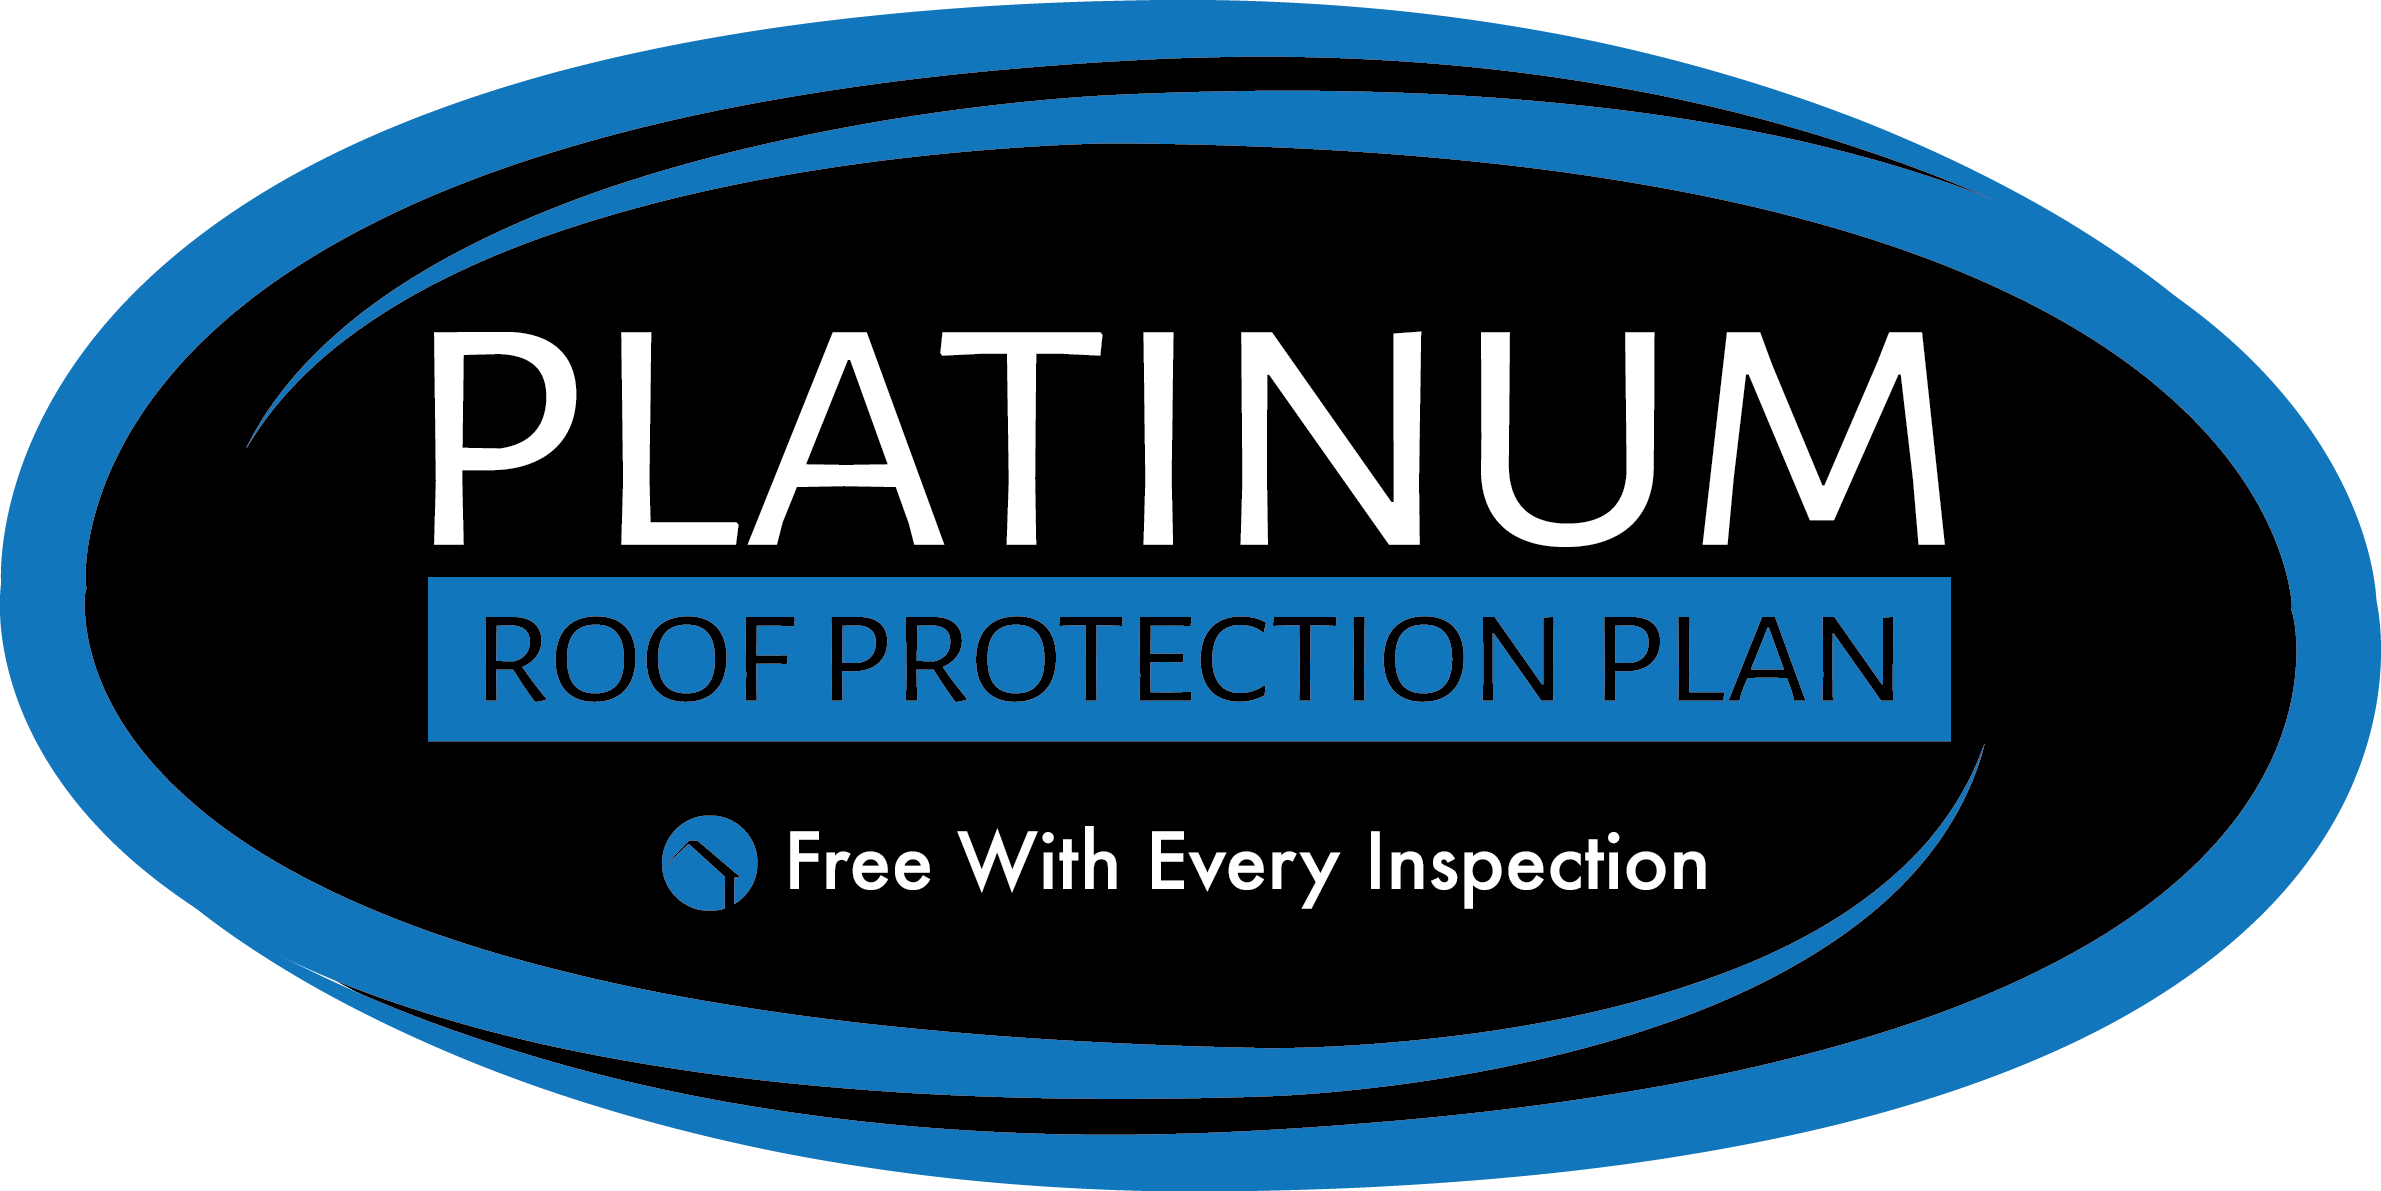 Roof Protection Plan